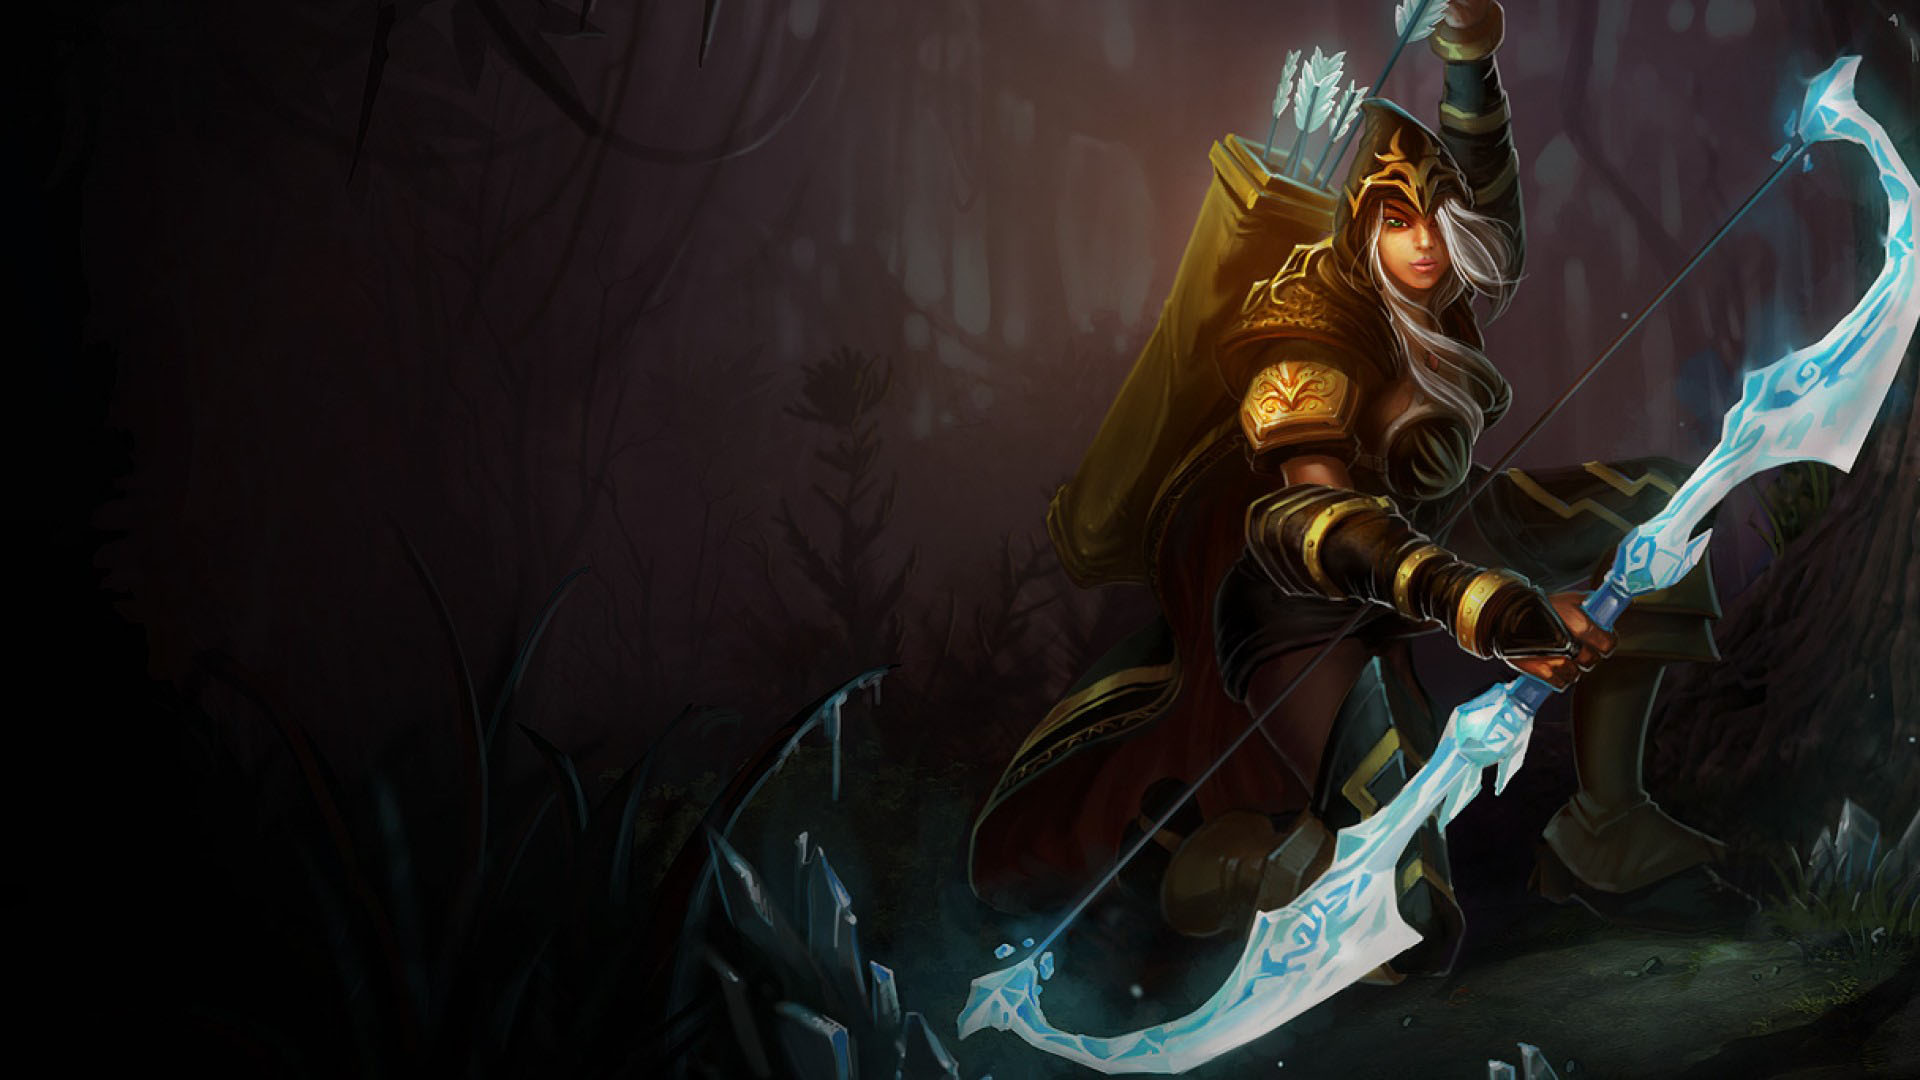 Ashe the Frost Archer Classic Skin Artwork by Riot Games